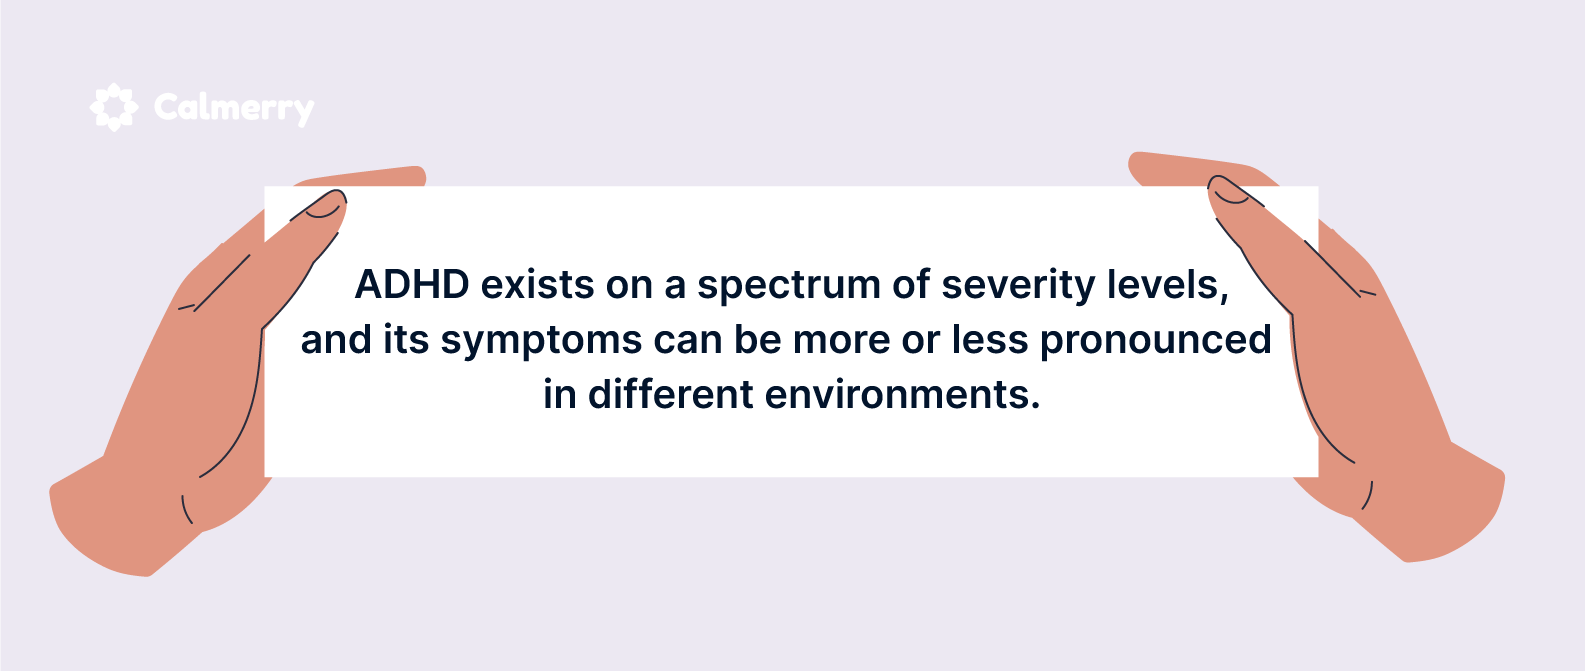 ADHD exists on a spectrum of severity levels, and its symptoms can be more or less pronounced in different environments. 